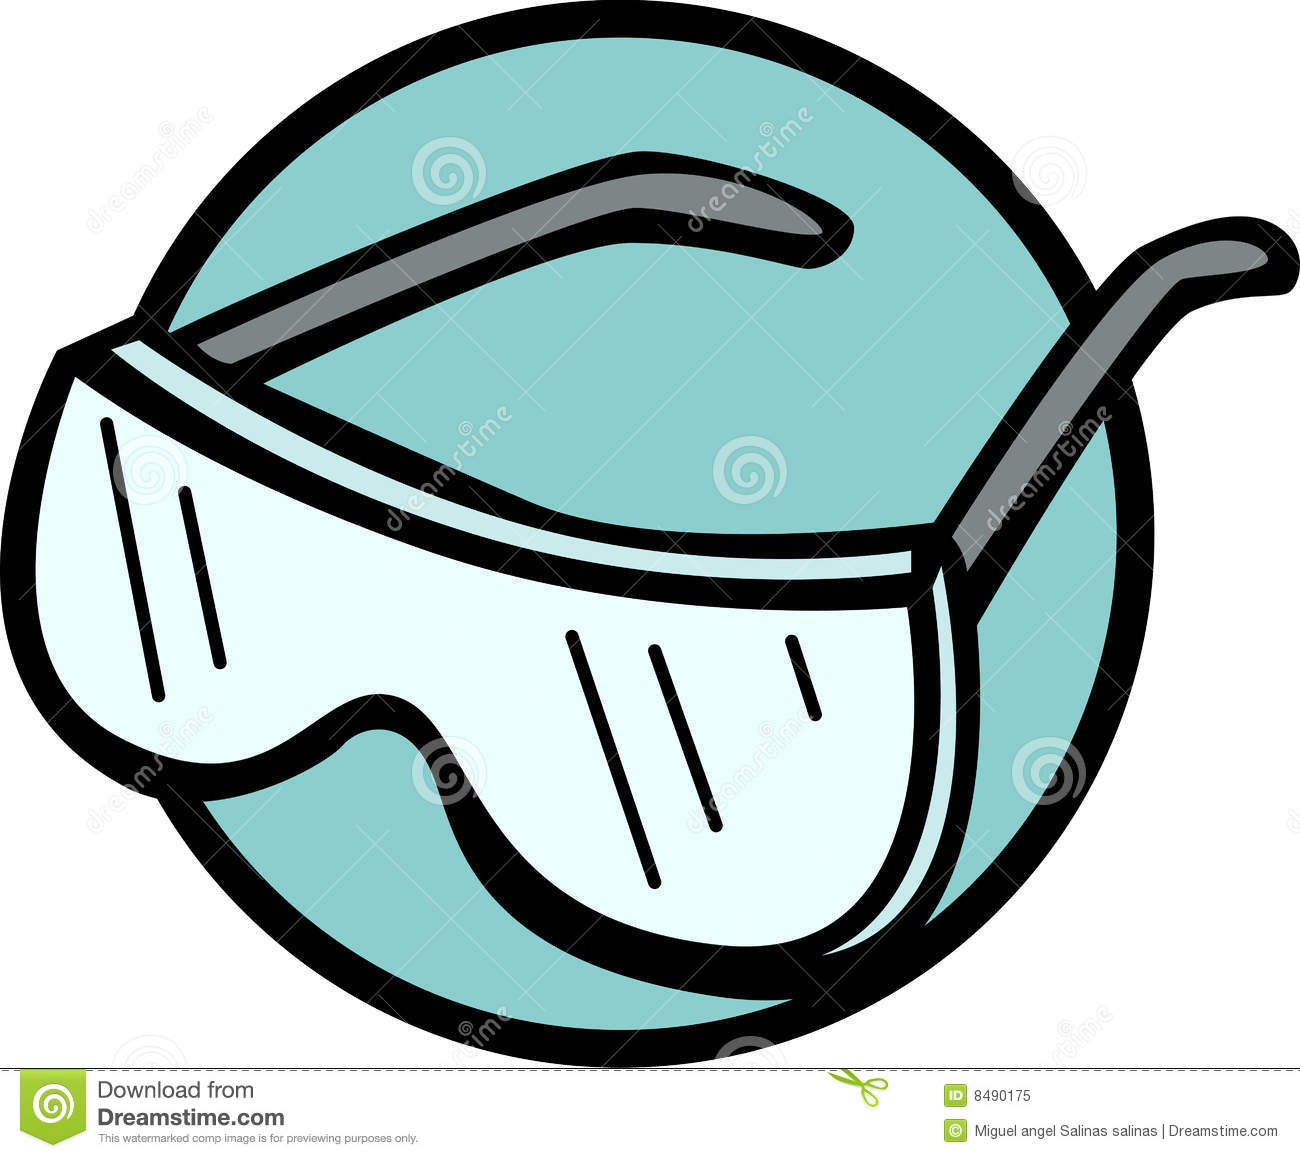 Safety goggles vector illustration Royalty Free Stock Photo